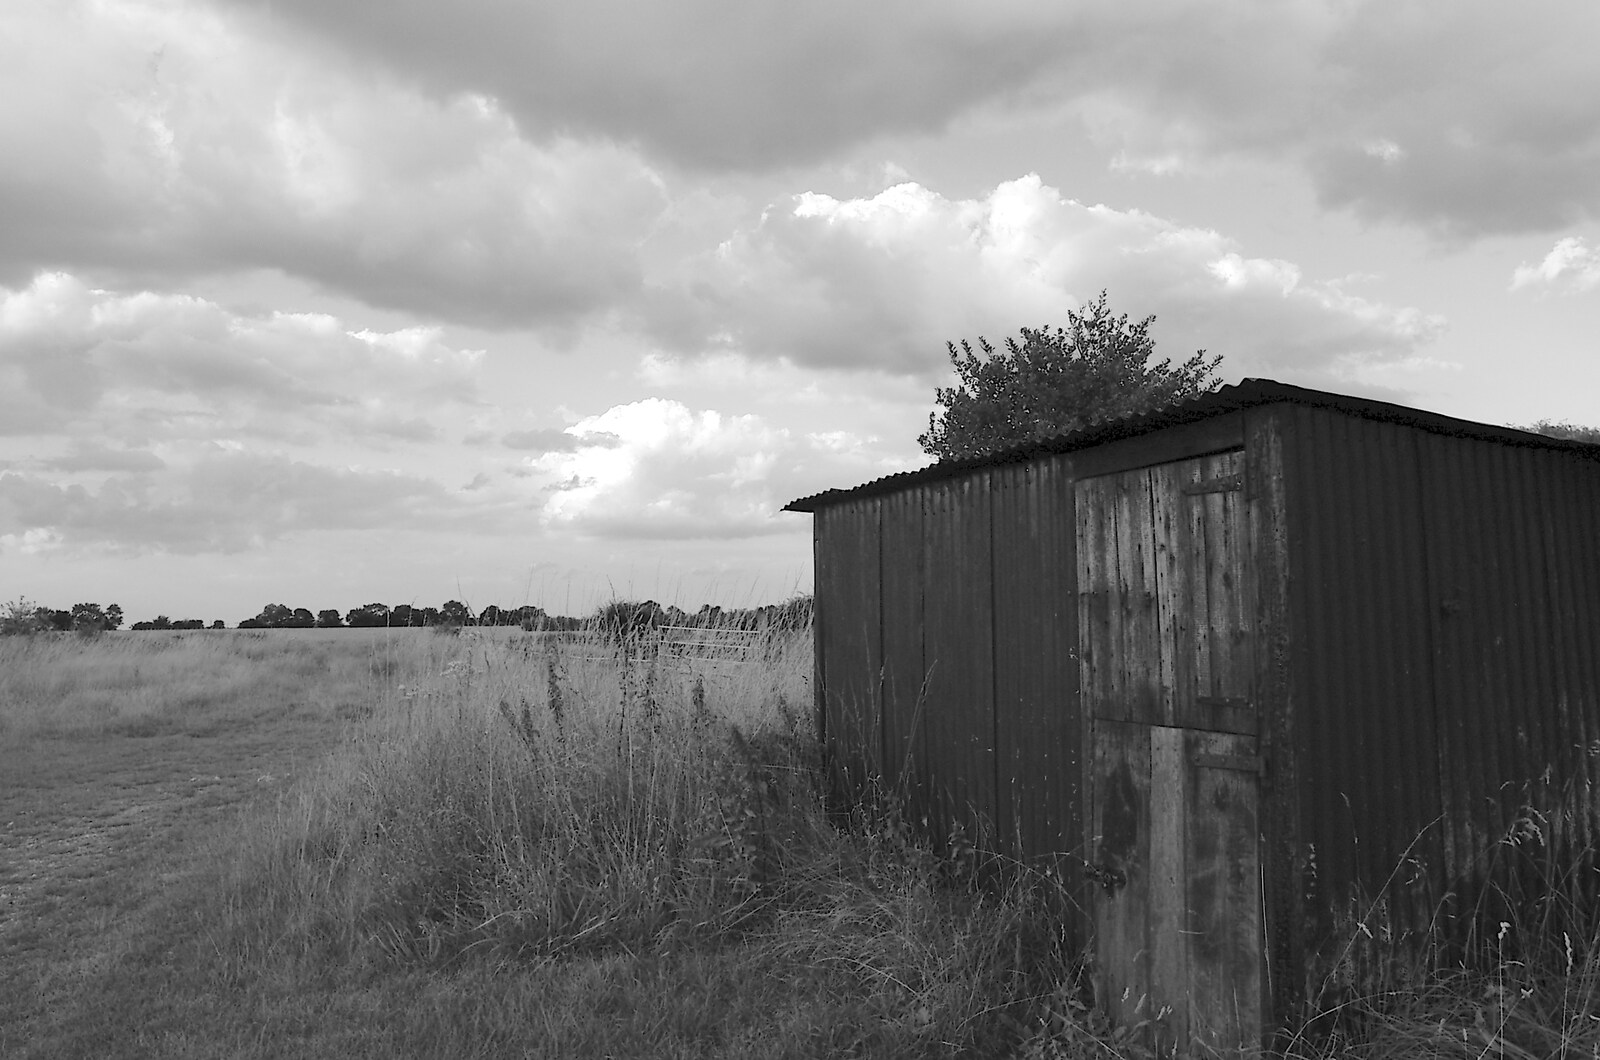 An old shed from The BBS, and the Big Skies of East Anglia, Diss and Hunston, Norfolk and Suffolk - 6th August 2005